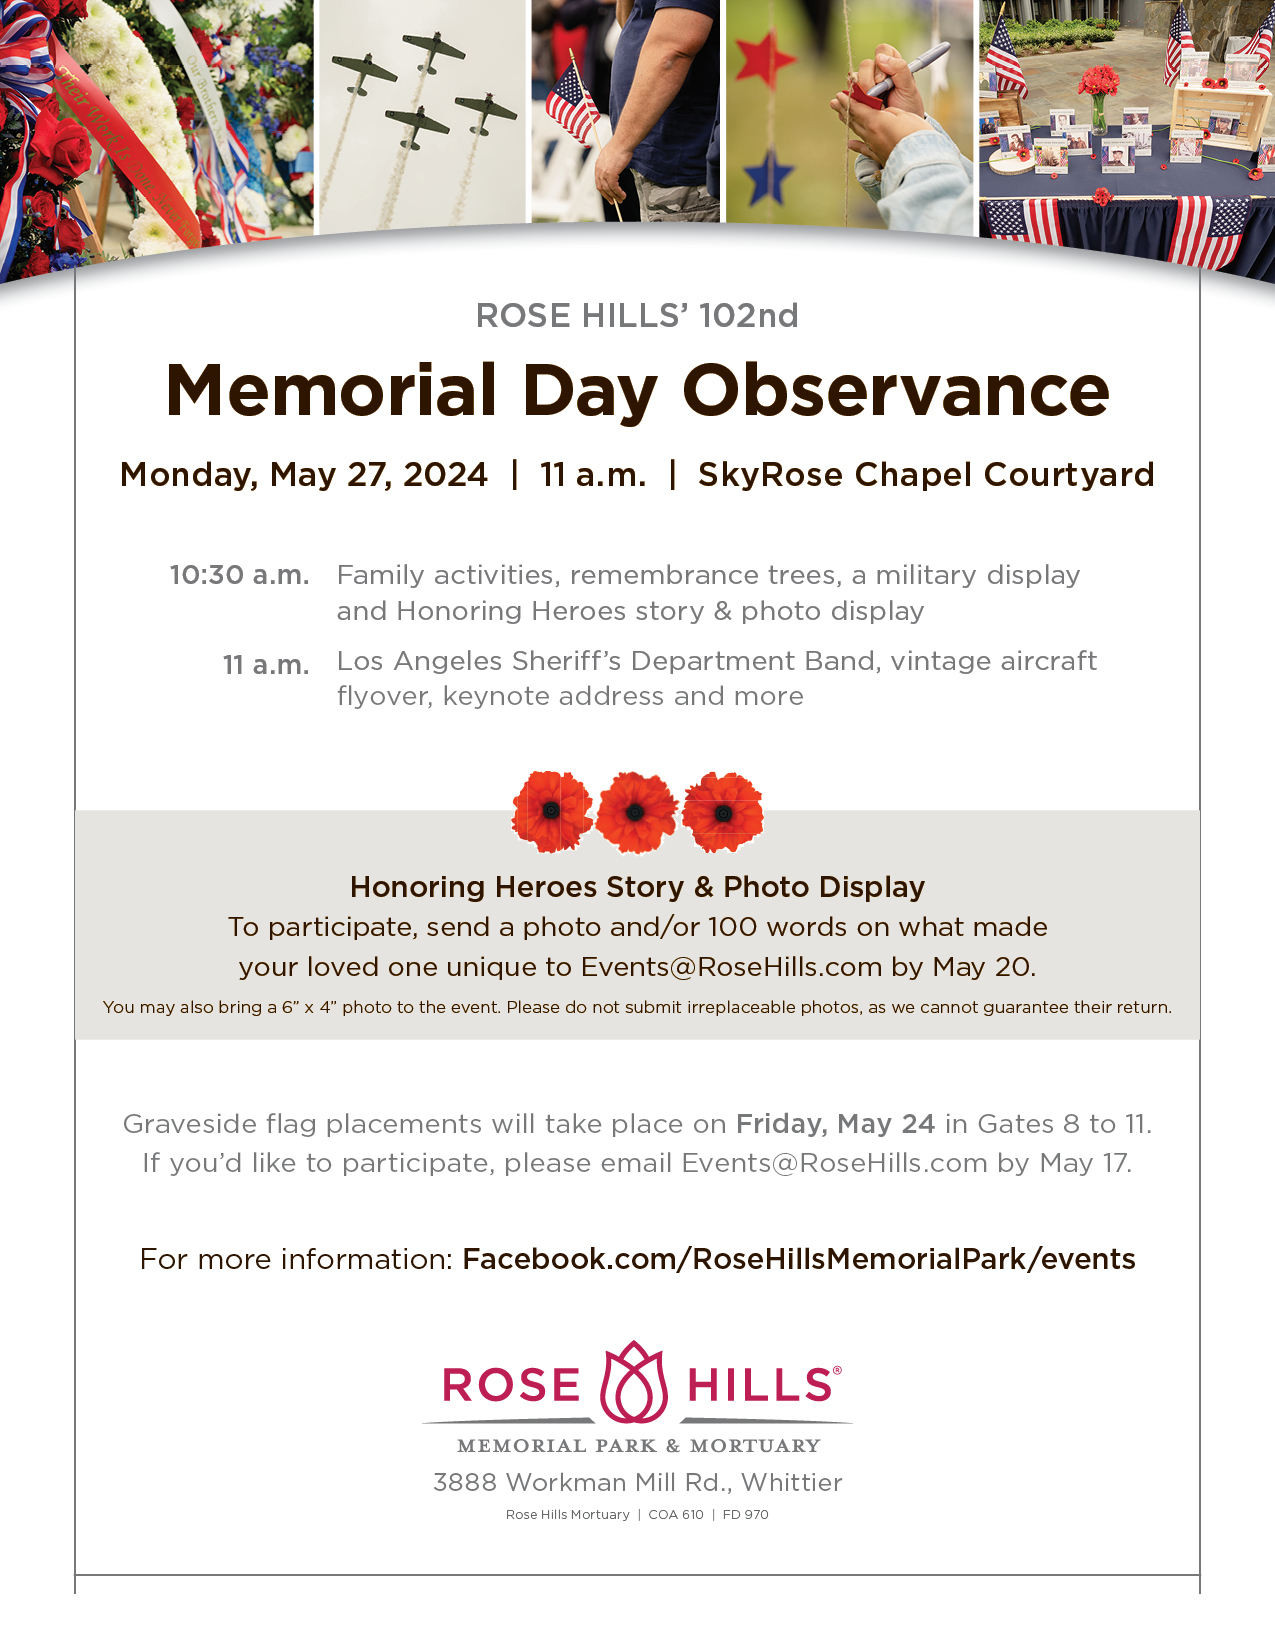 Rose Hills Memorial Park Memorial Day Observance for May 27th, 2024